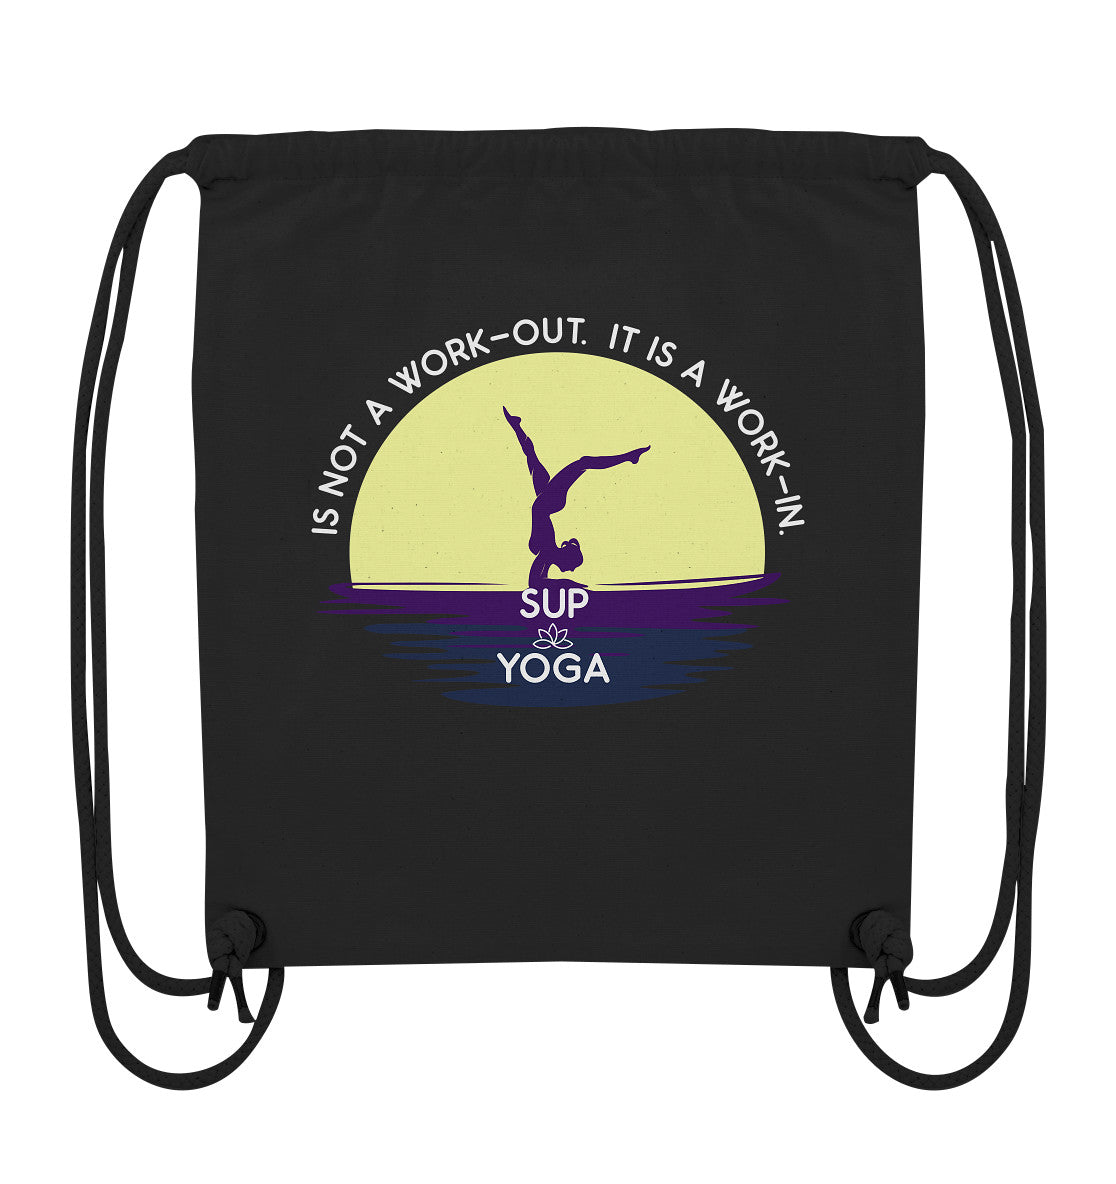 SUP YOGA IS NOT A WORK-OUT.  IT IS A WORK-IN.  - Organic Gym-Bag